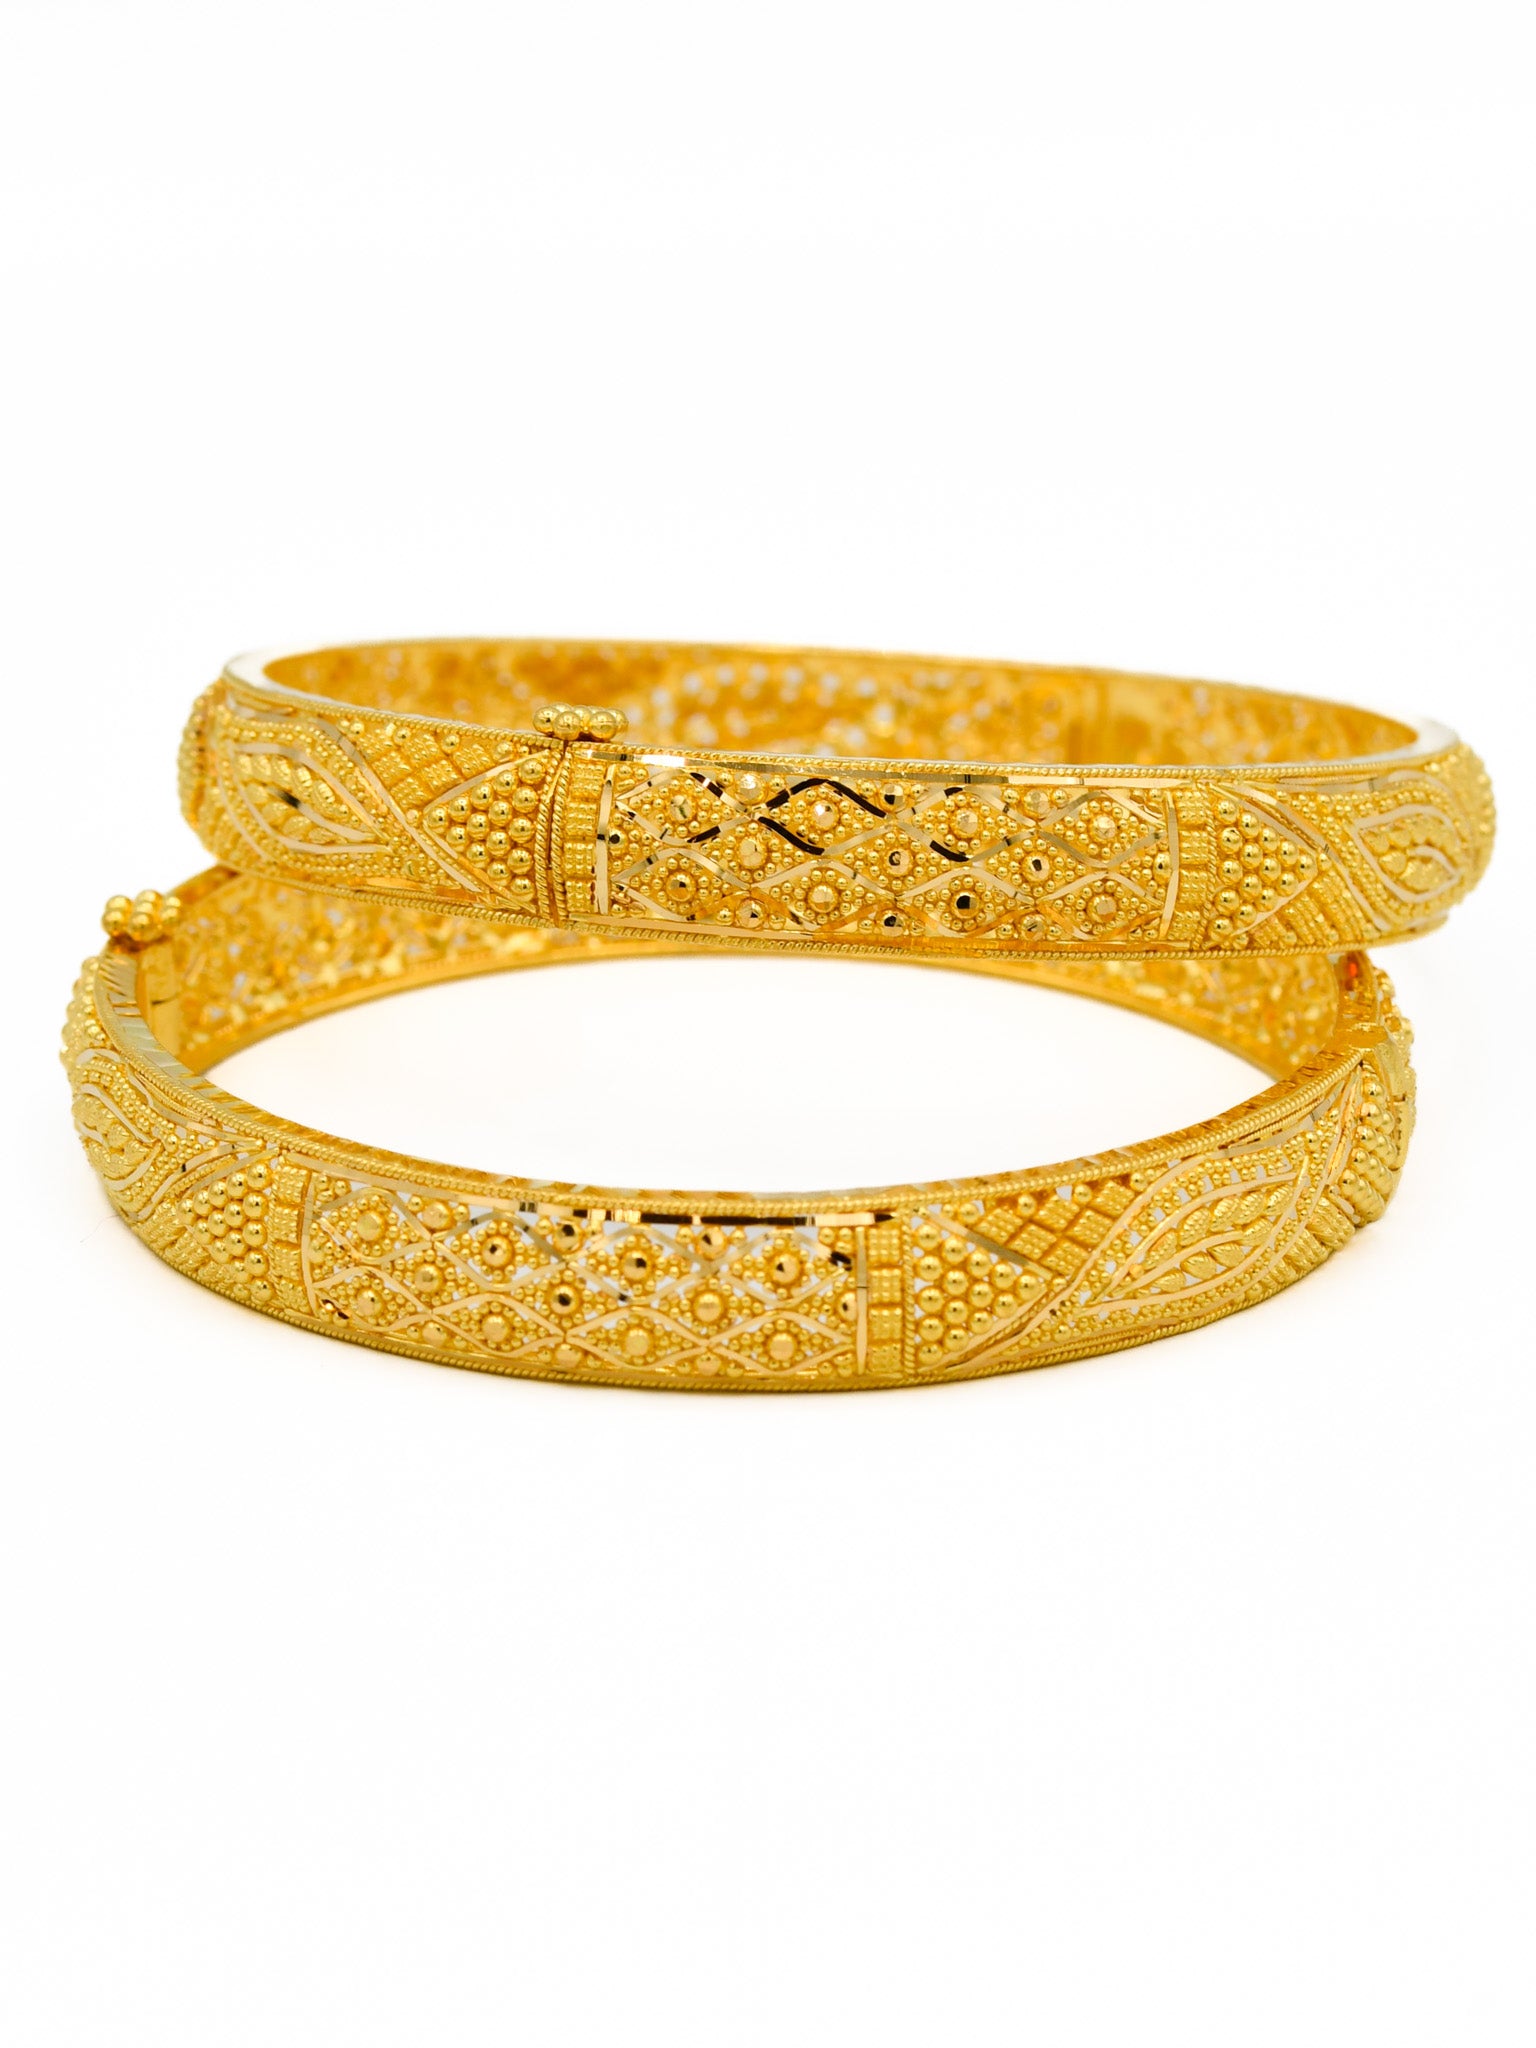 Exclusive 22ct Gold Plated Openable Carved Bangles | Khwaish Jewellery